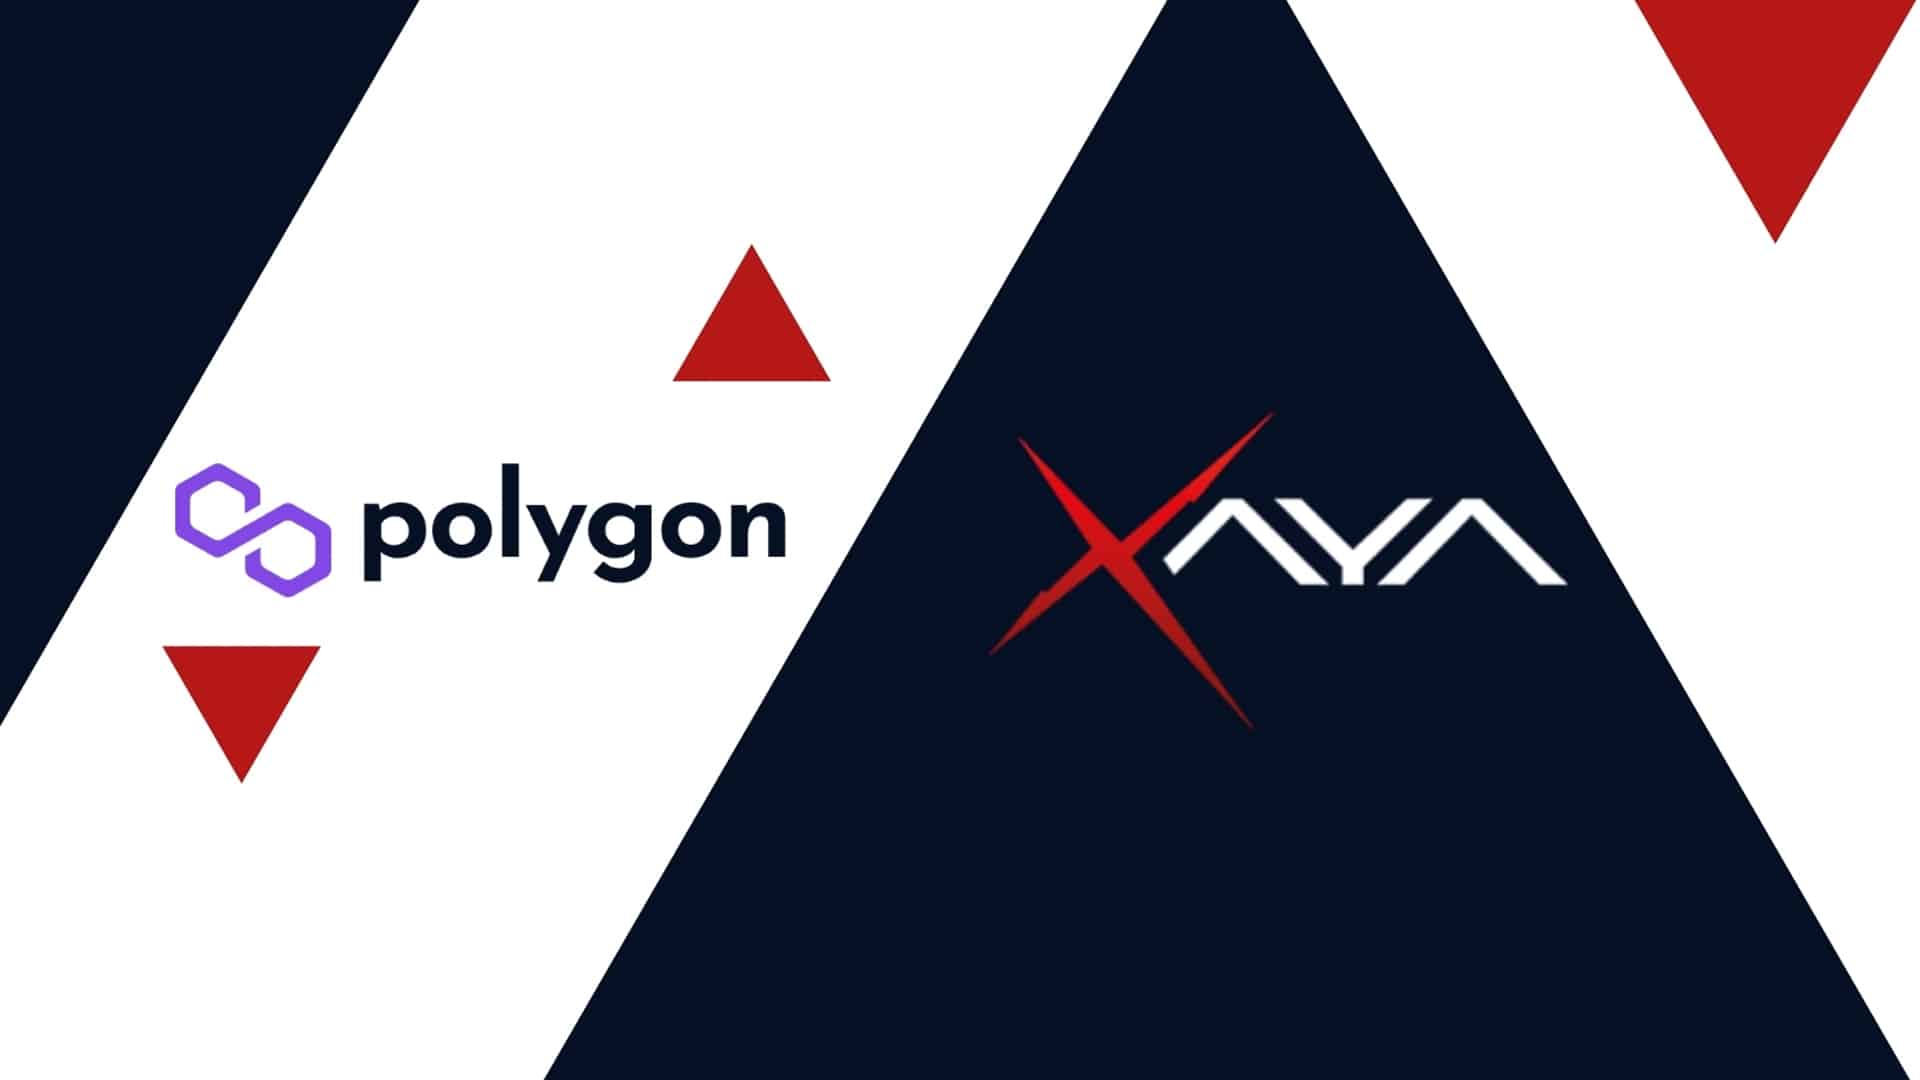 xaya polygon Dekaron M is a PC MMORPG that was first released in 2004 and published by Nexon. Now, the game is being rebranded as Dekaron G as they plan to bring blockchain features into the game. 